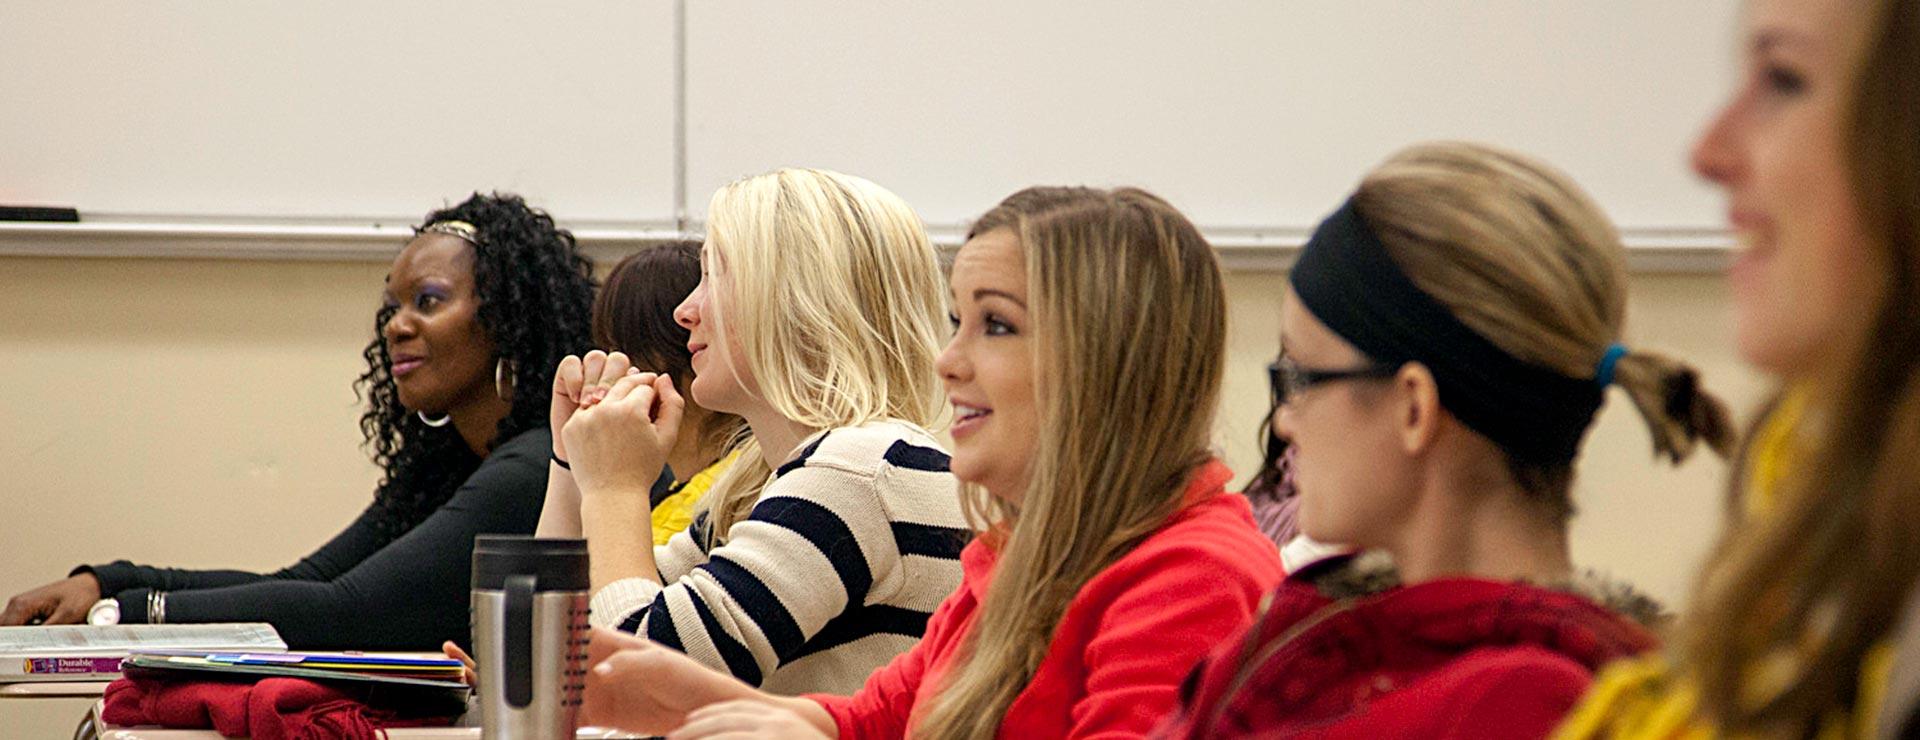 Female students participating in classroom discussion